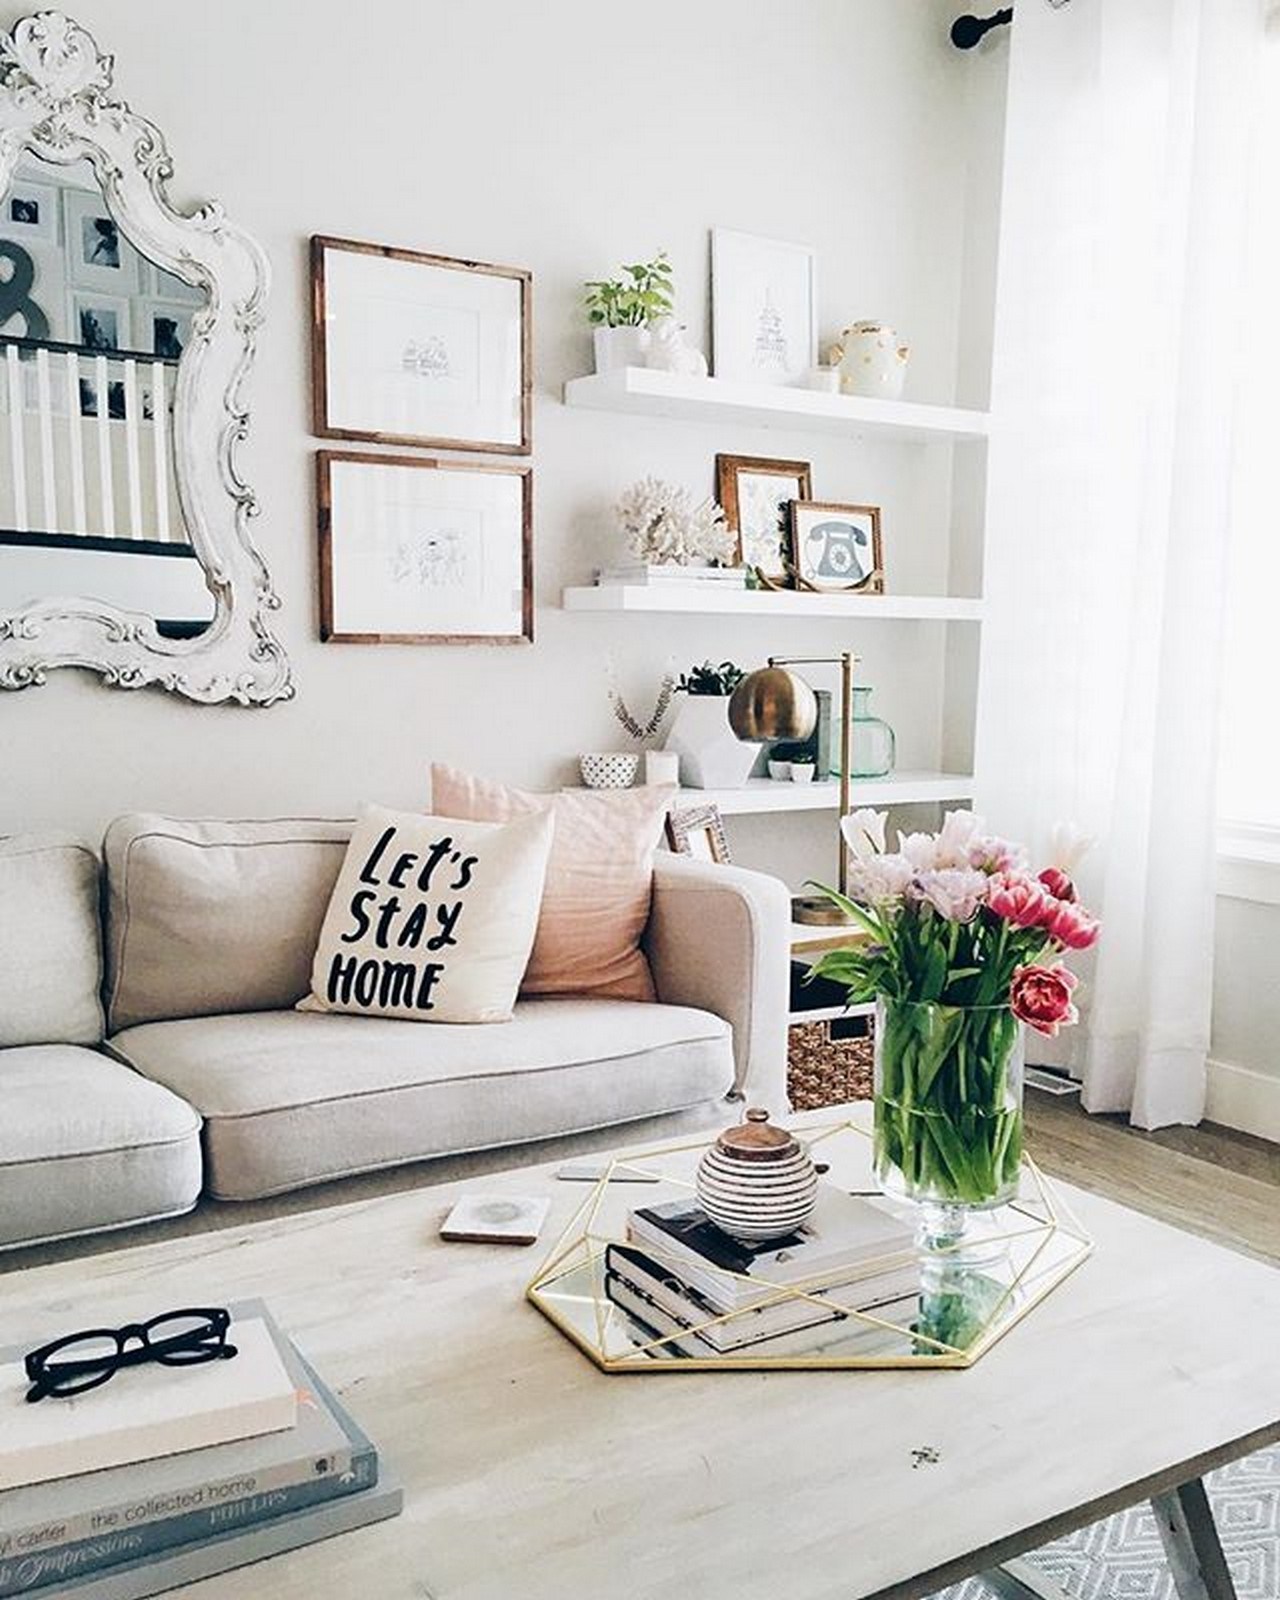 20 Perfect Small Apartment Decorating on a Budget - Decor ...